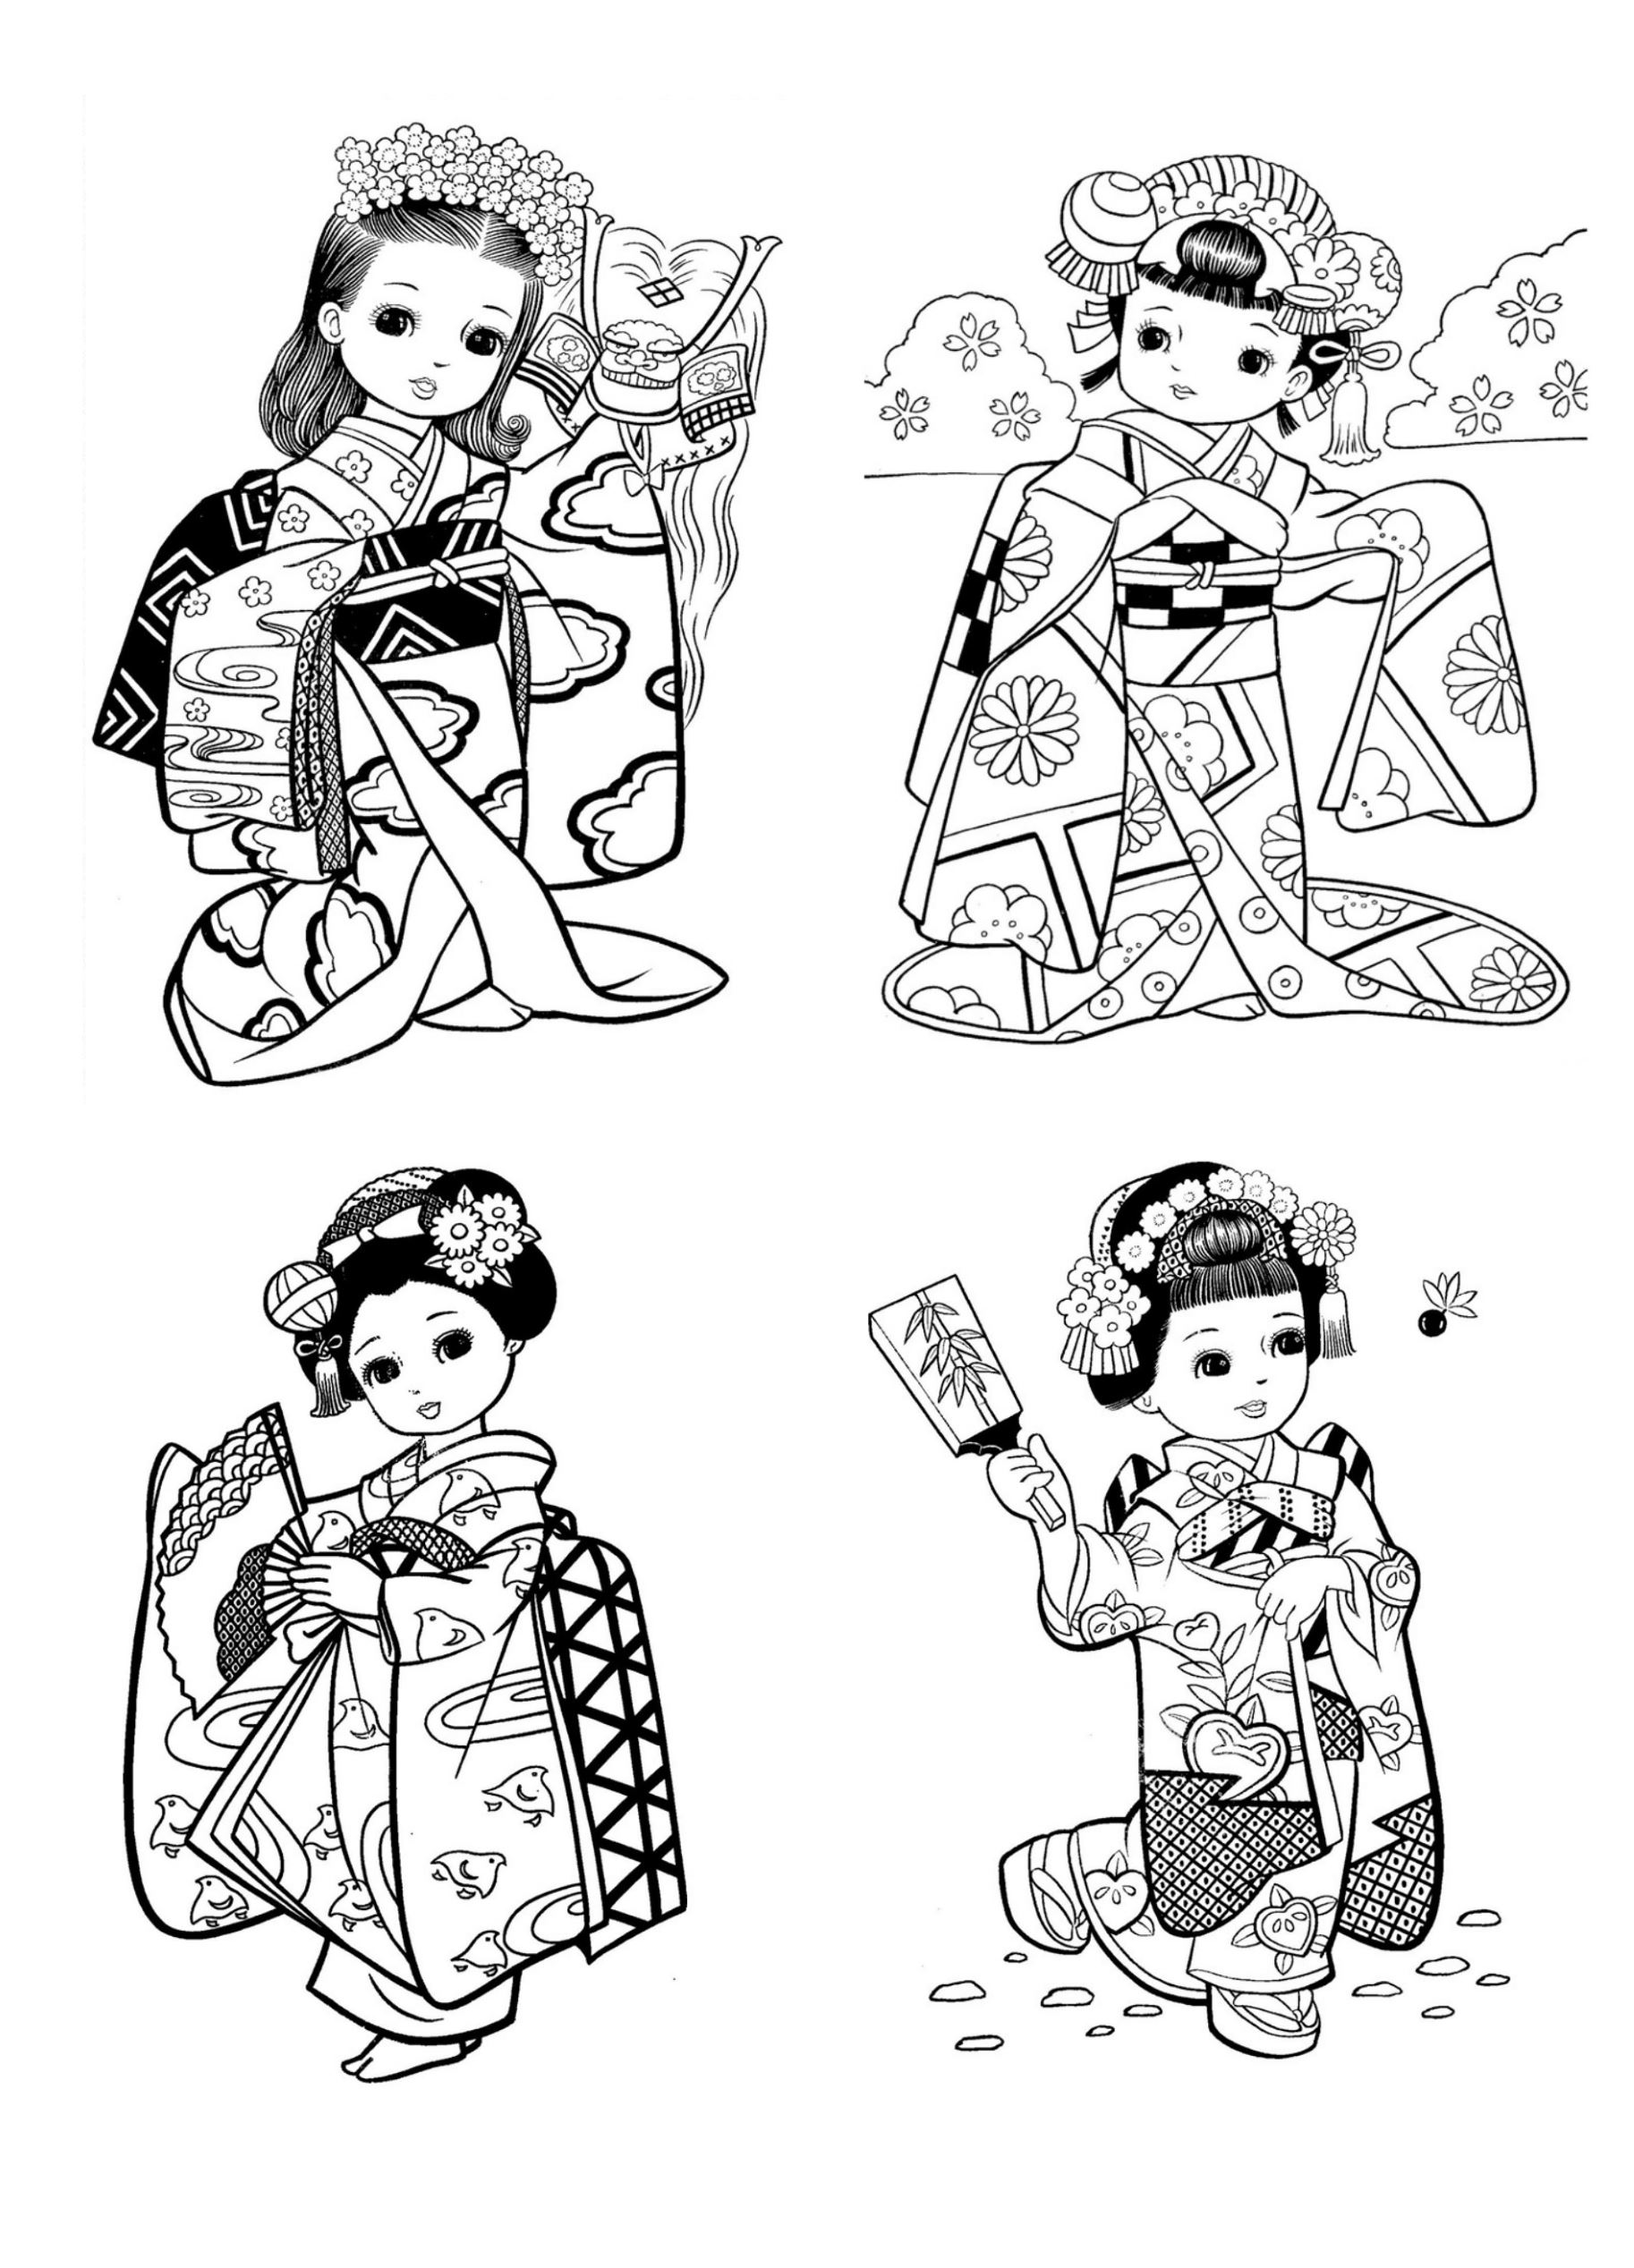 Download Little japanese child style drawing - Japan Adult Coloring Pages - Page 2/